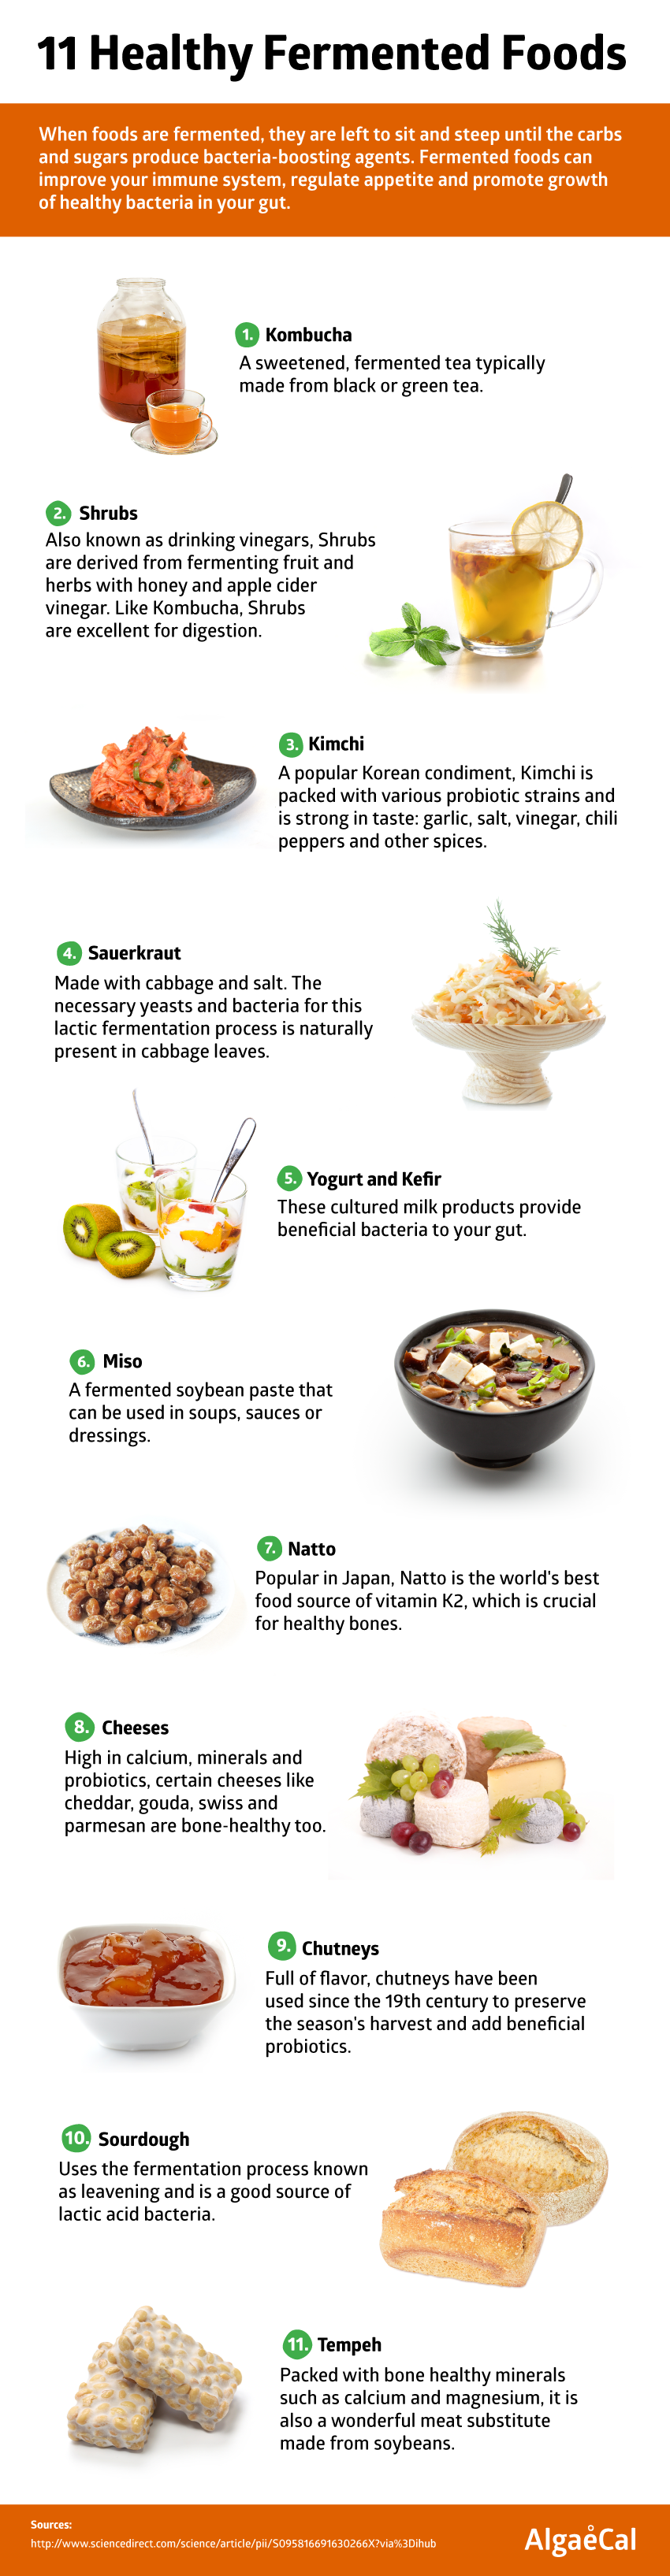 11 fermented foods infographic